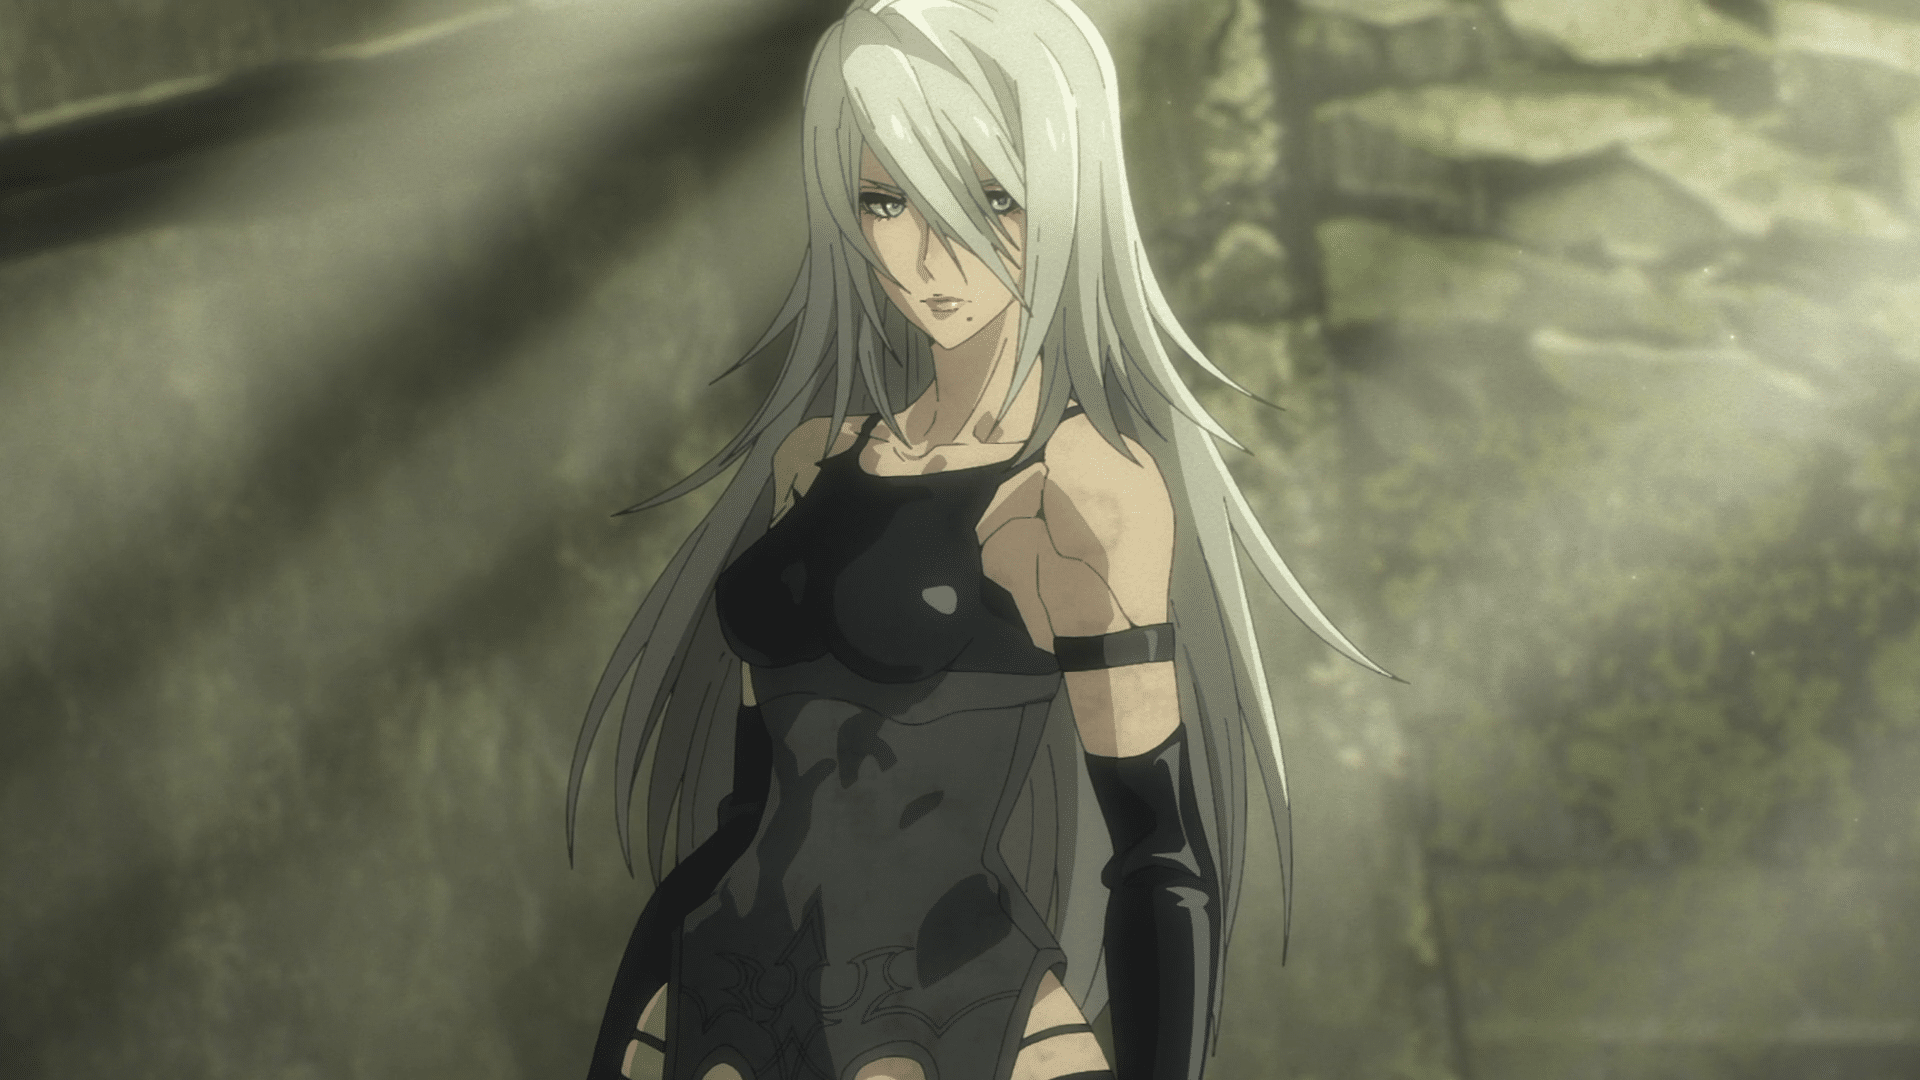 NieR:Automata Ver 1.1a Anime Episodes 9-12 Joining Crunchyroll July 23